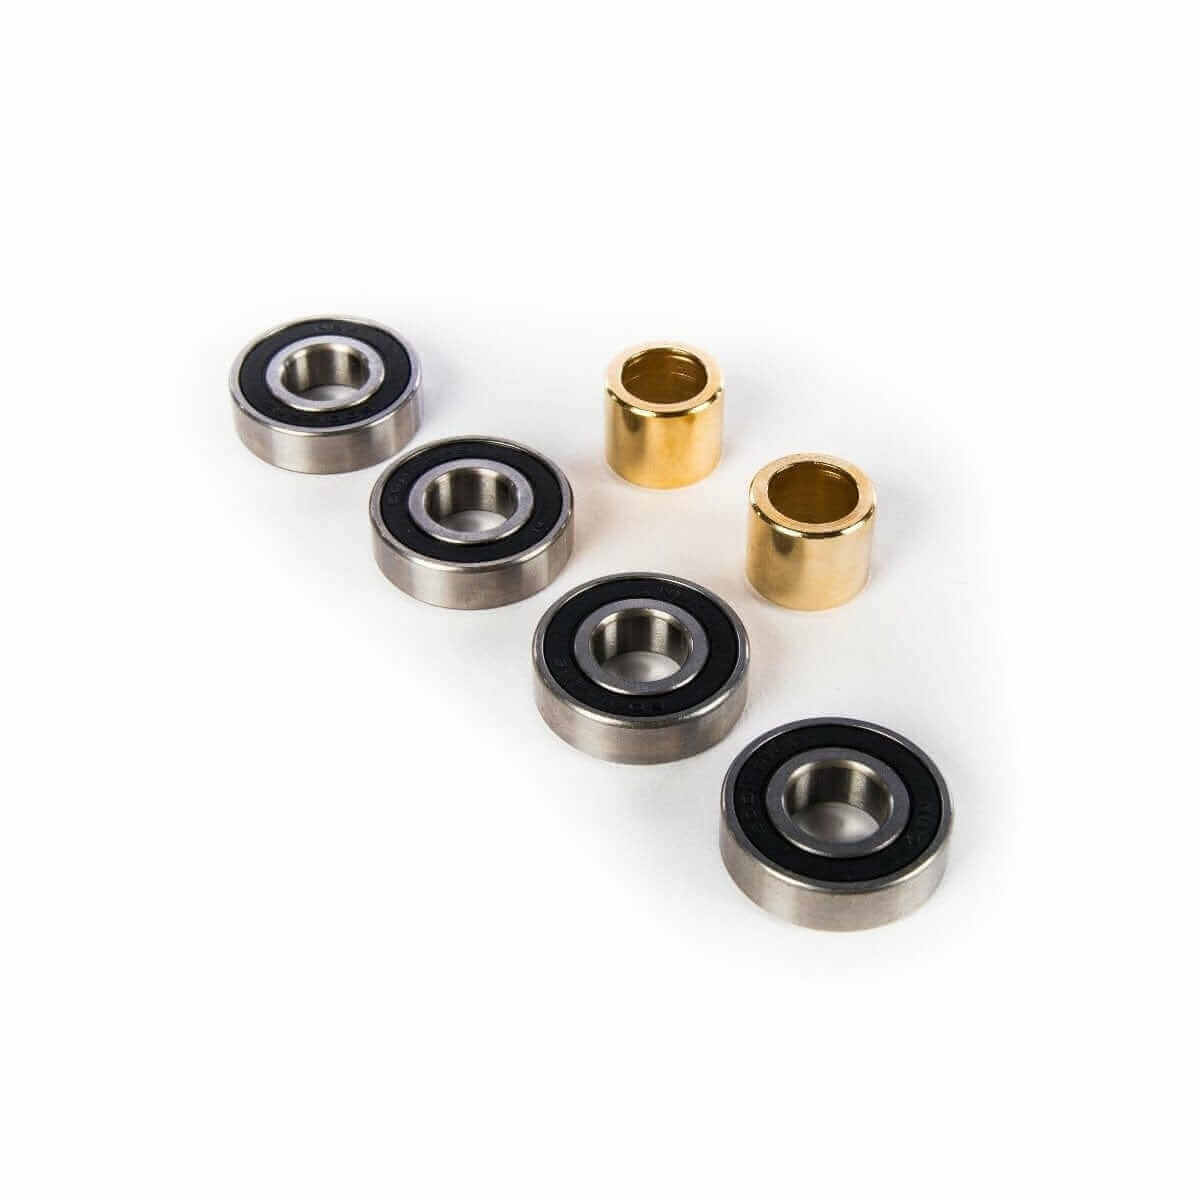 Ethic DTC 12STD Bearings - TSP The Shop